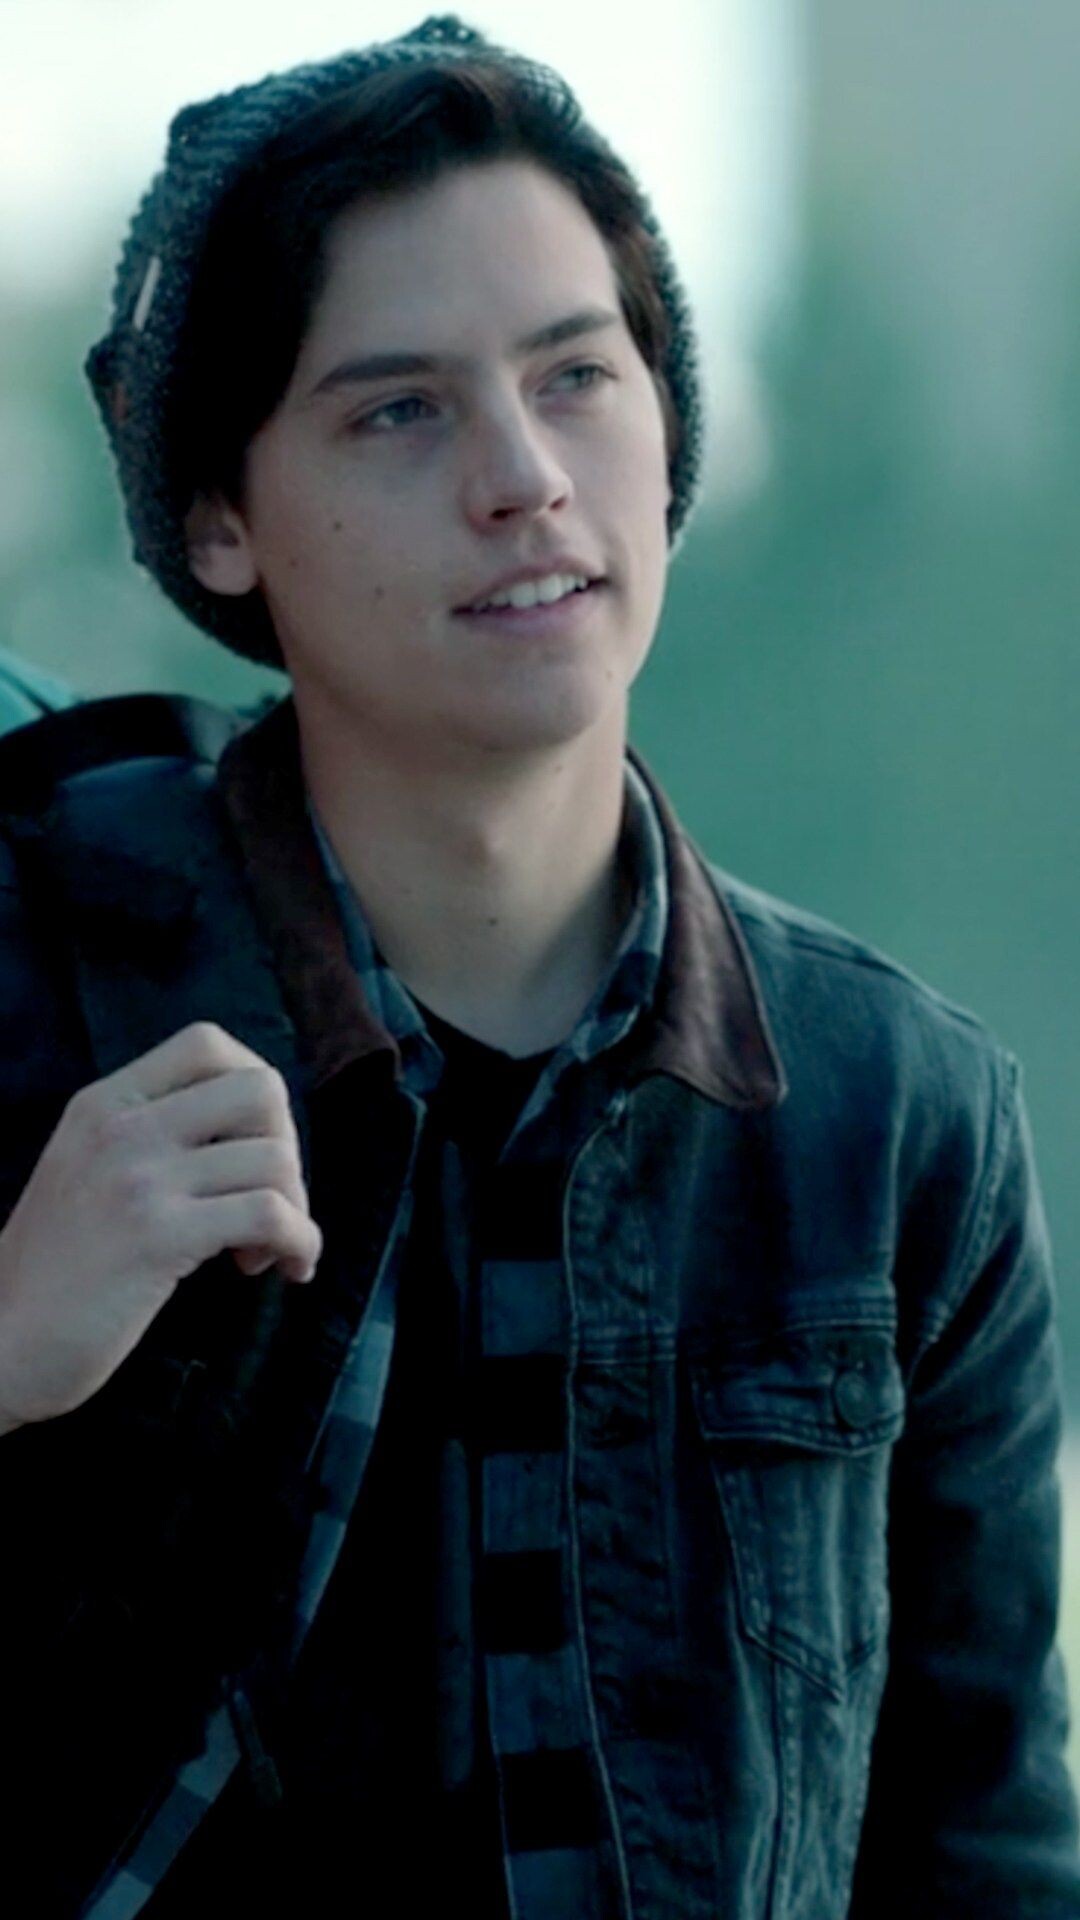 Riverdale (TV Series): Jughead Jones, A philosophically inclined social outcast who is Archie's best friend. 1080x1920 Full HD Wallpaper.